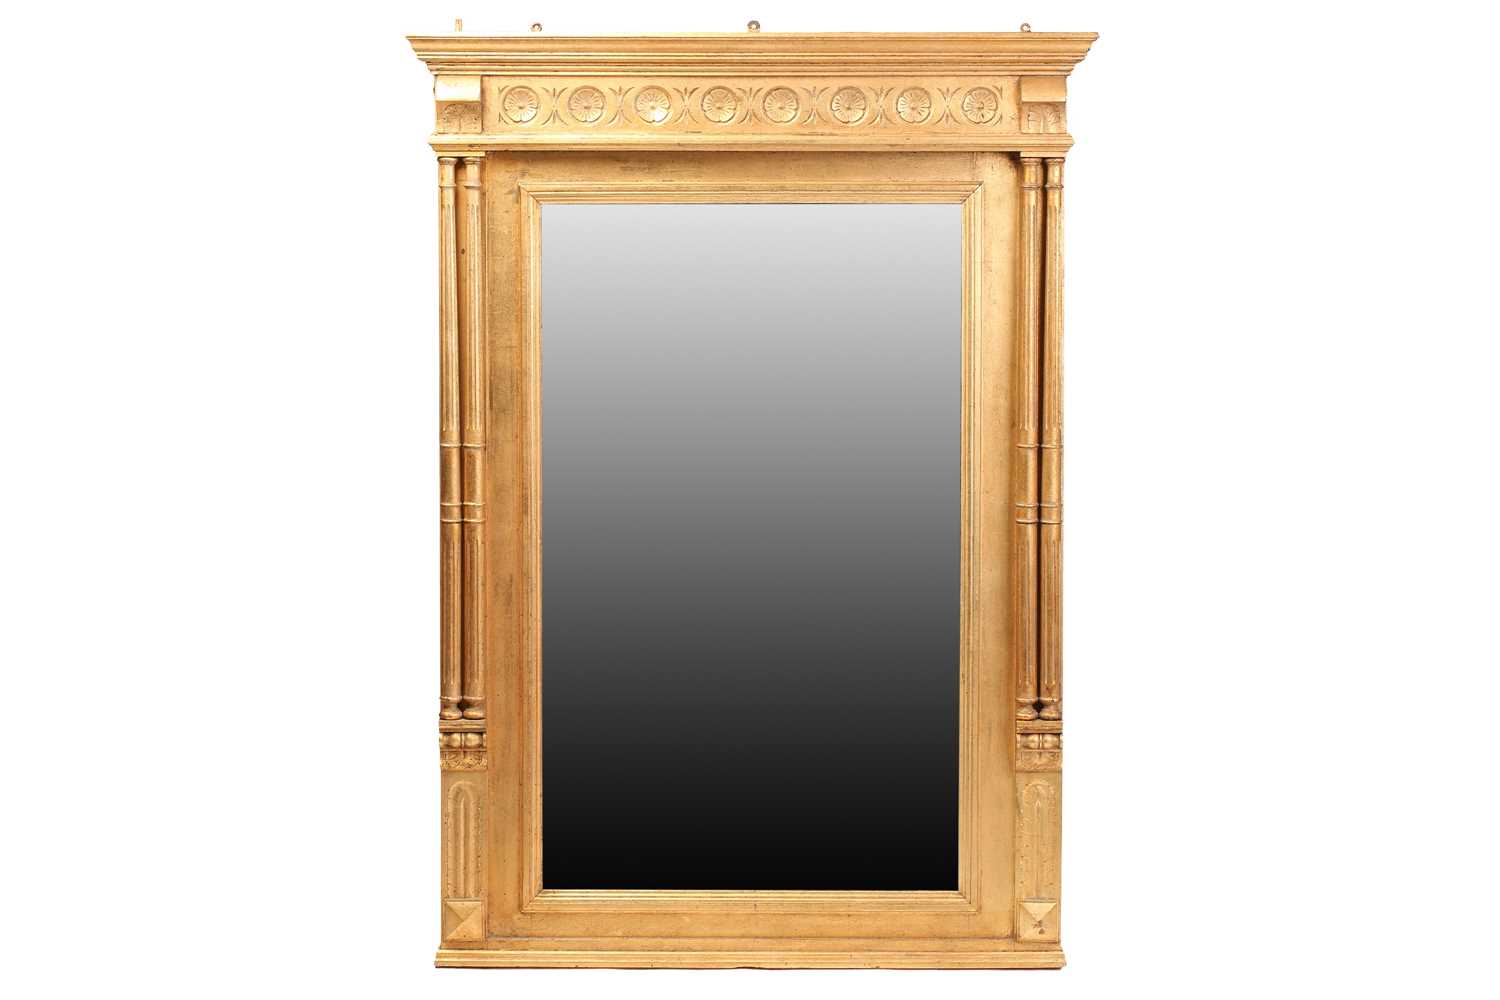 A Georgian style giltwood mirror, 20th century, the rectangular glass beneath a cavetto pediment and